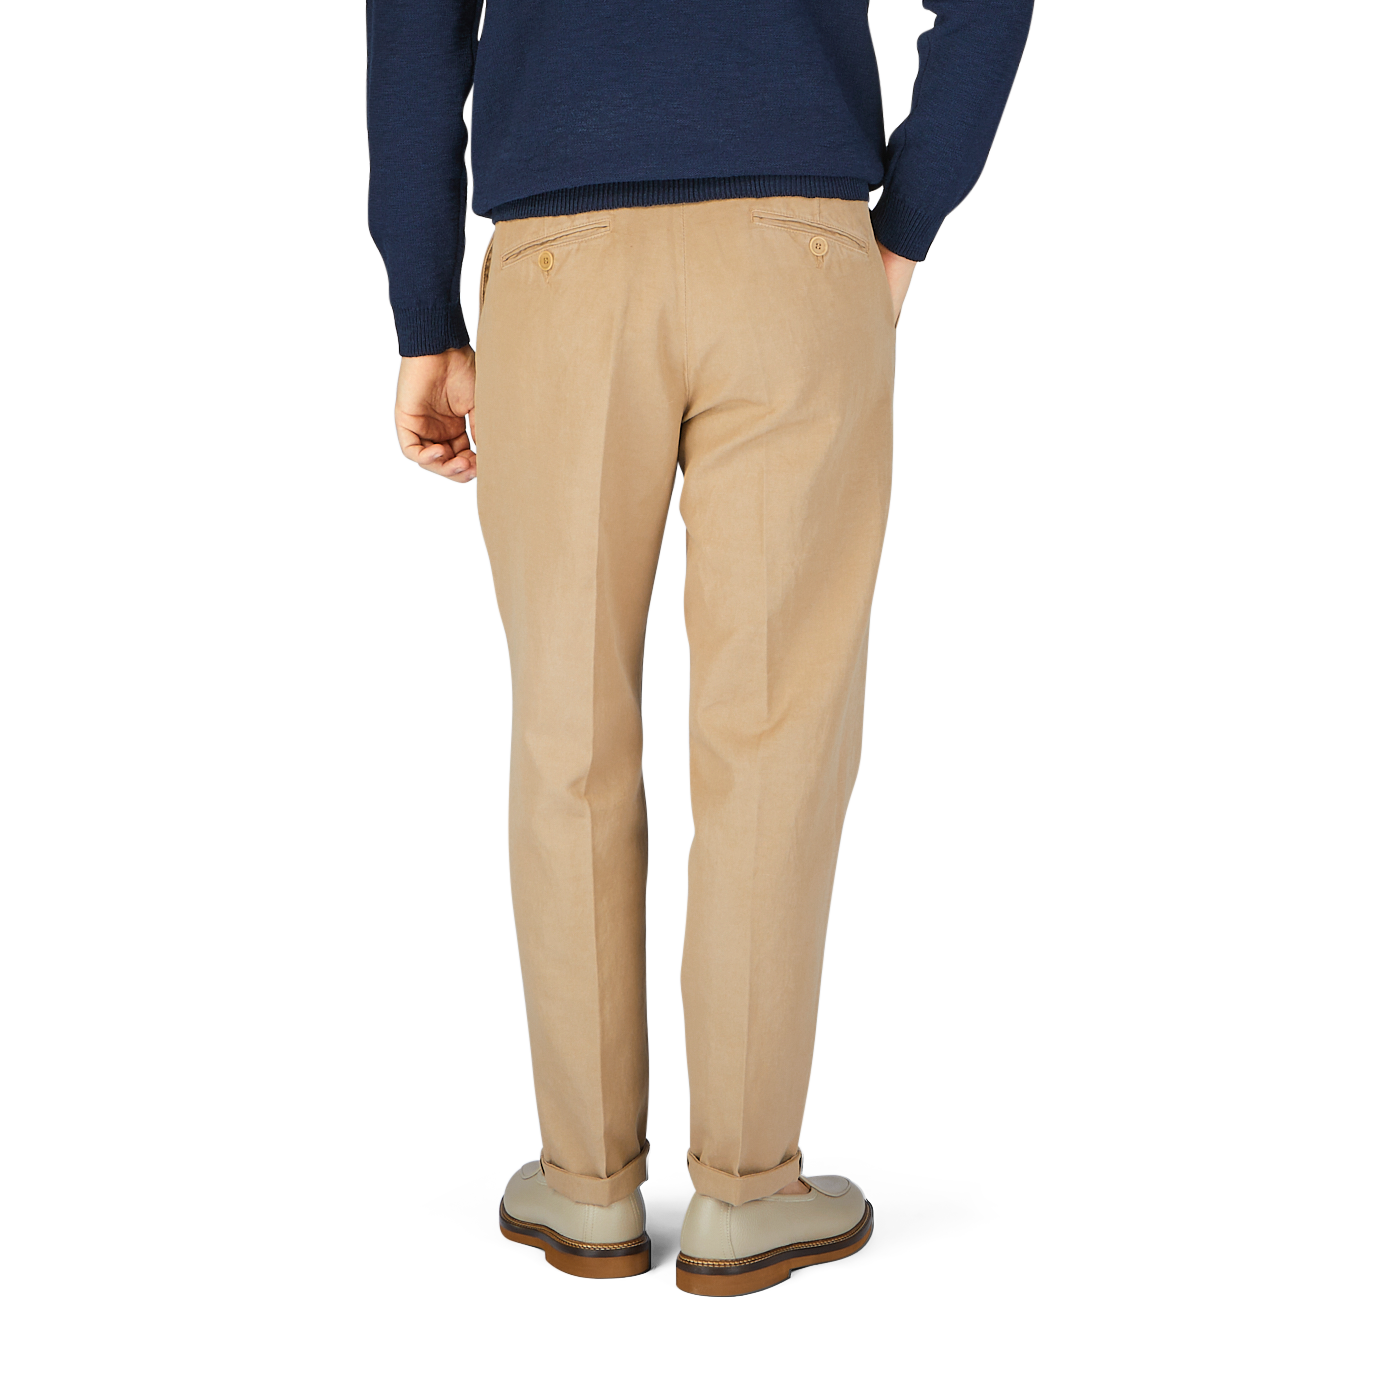 This is the back view of a man in Beige Cotton Linen Duilio Trousers from Tela Genova and a navy sweater.